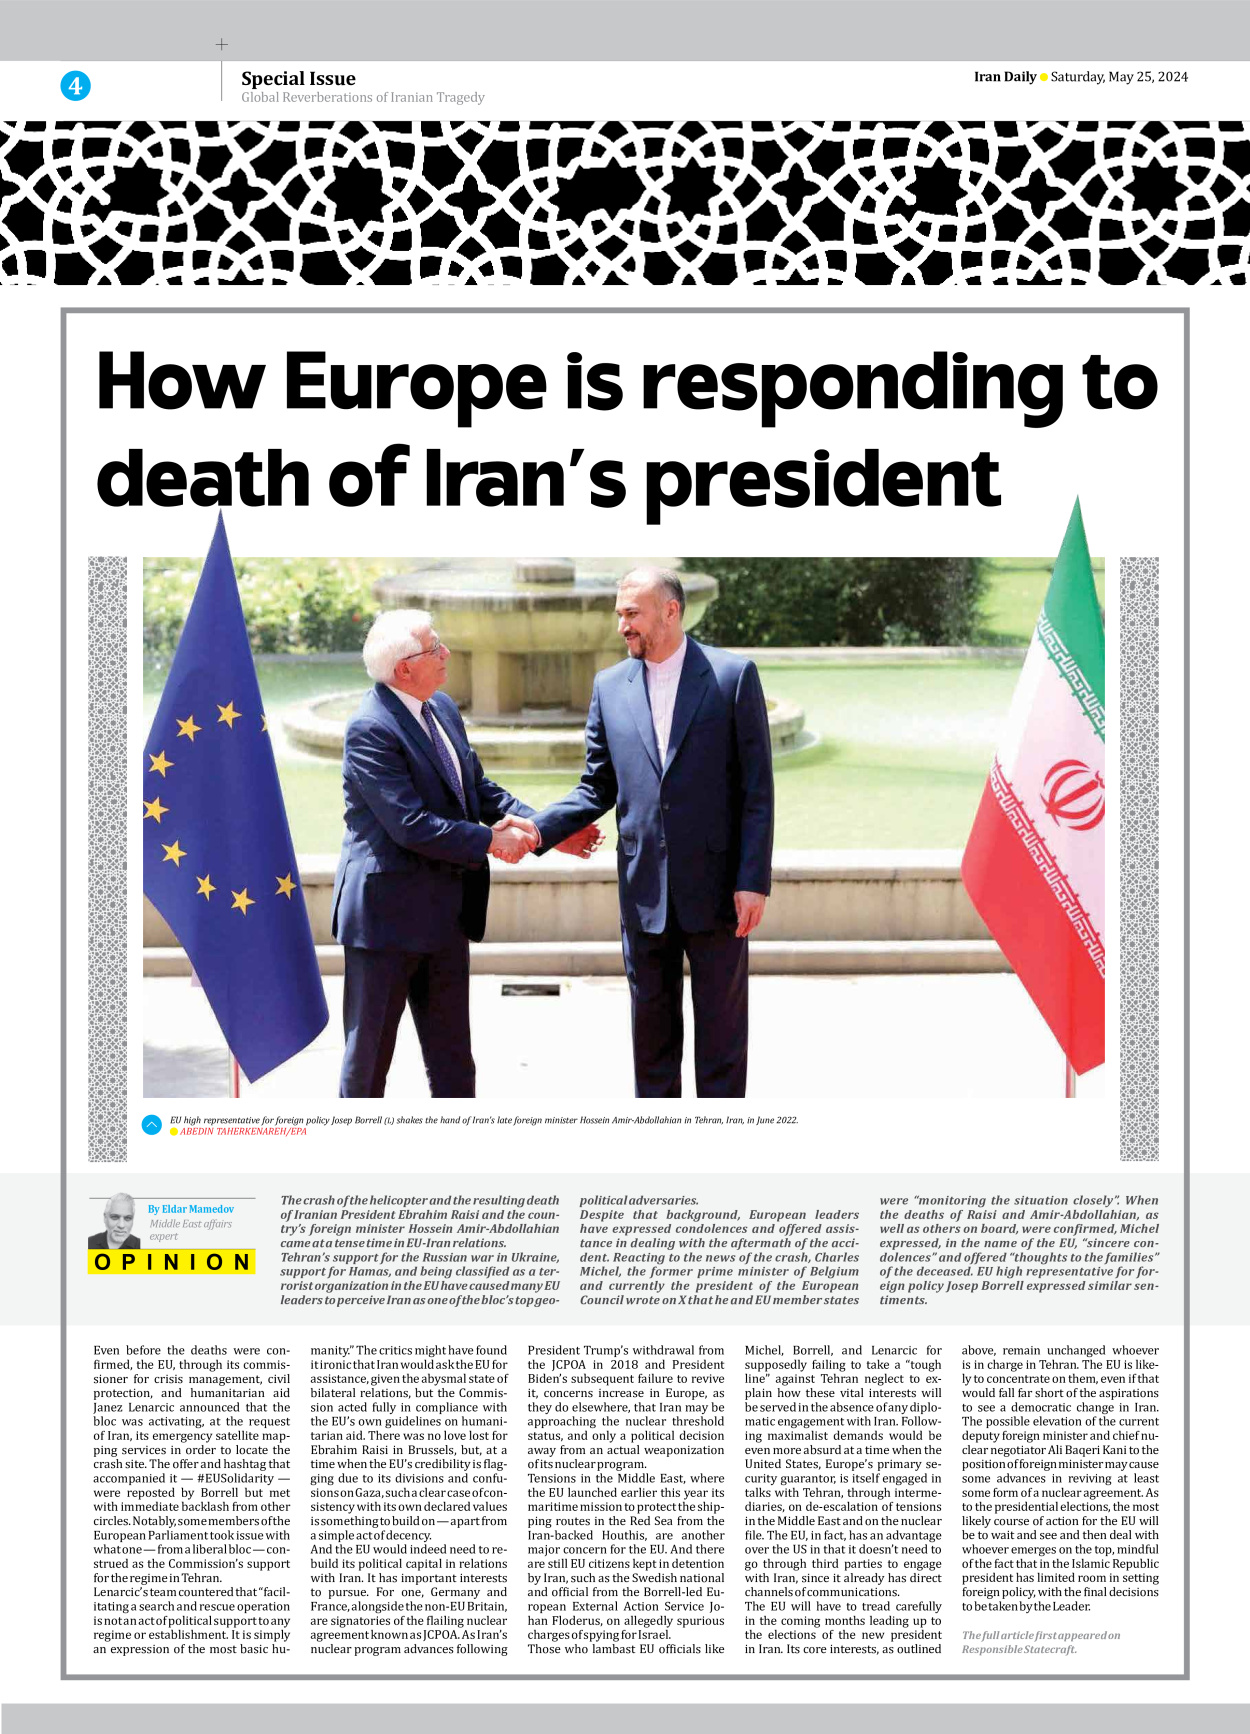 Iran Daily - Number Seven Thousand Five Hundred and Sixty Five - 25 May 2024 - Page 4